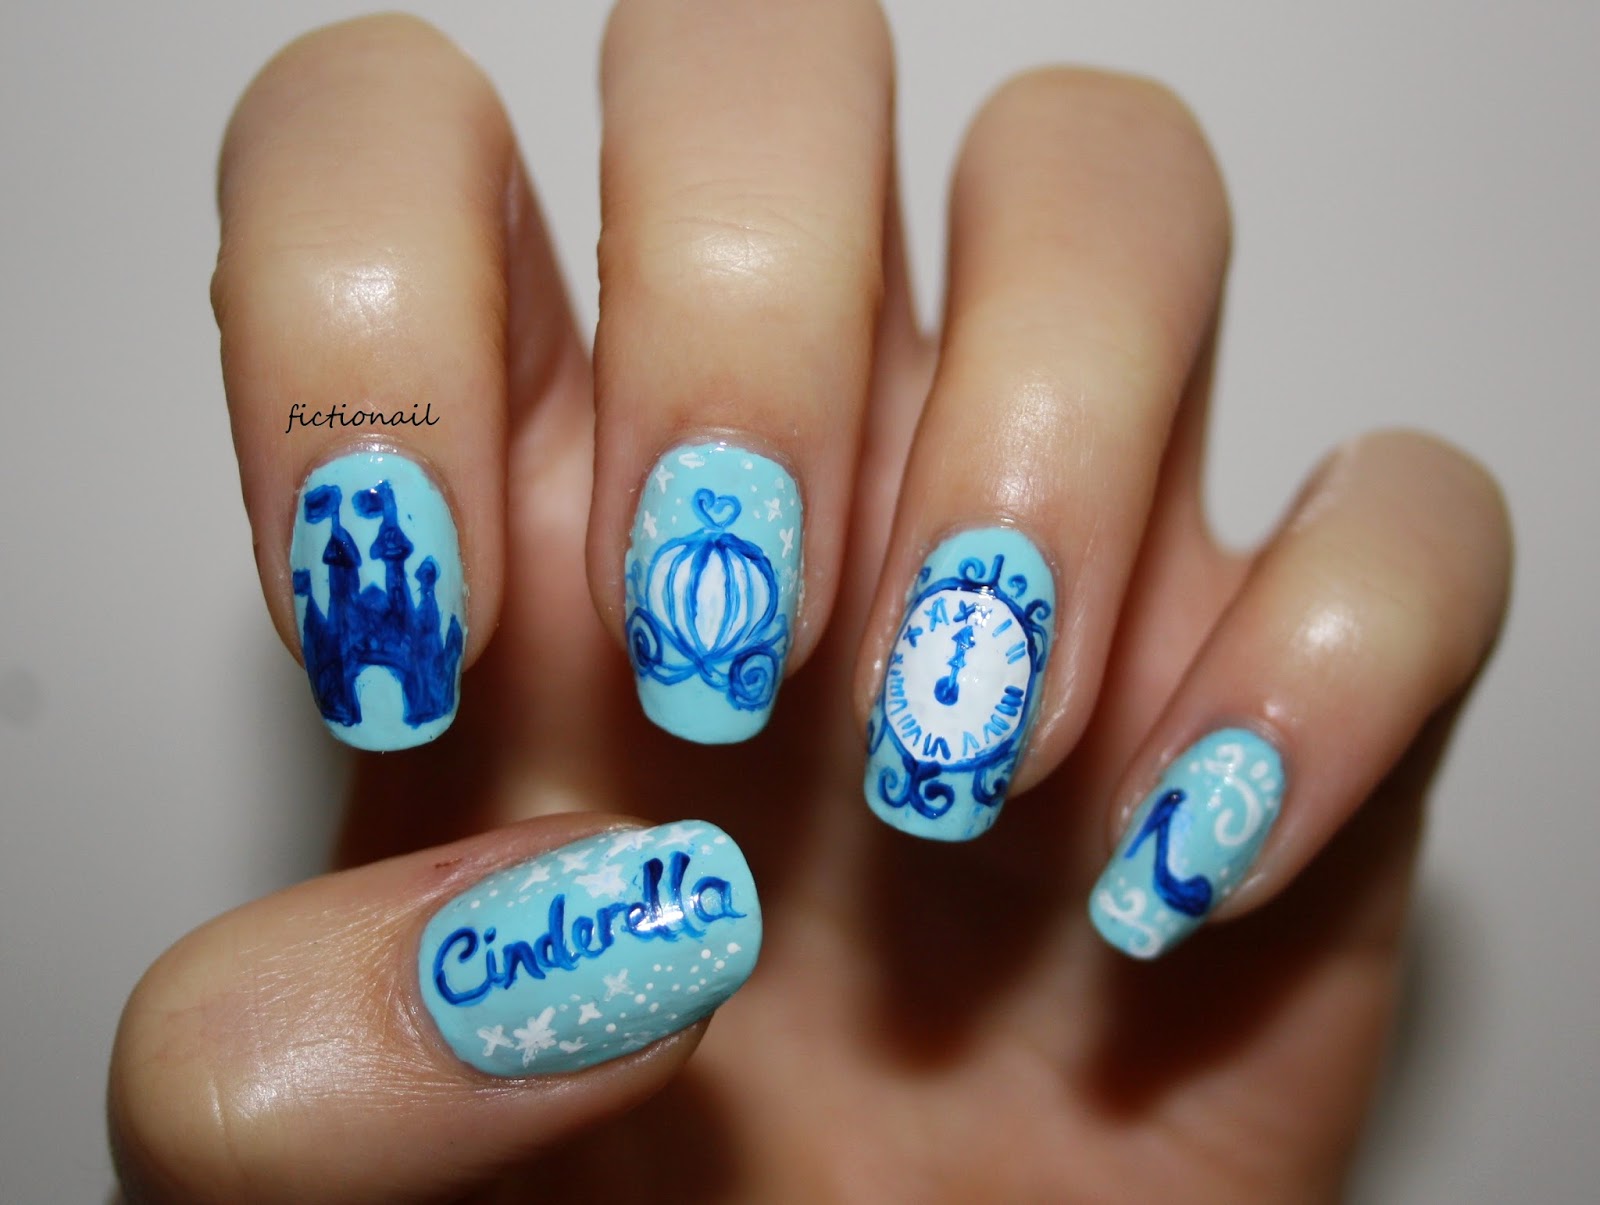 4. Amplaz Mall's top nail art designs inspired by Cinderella - wide 1